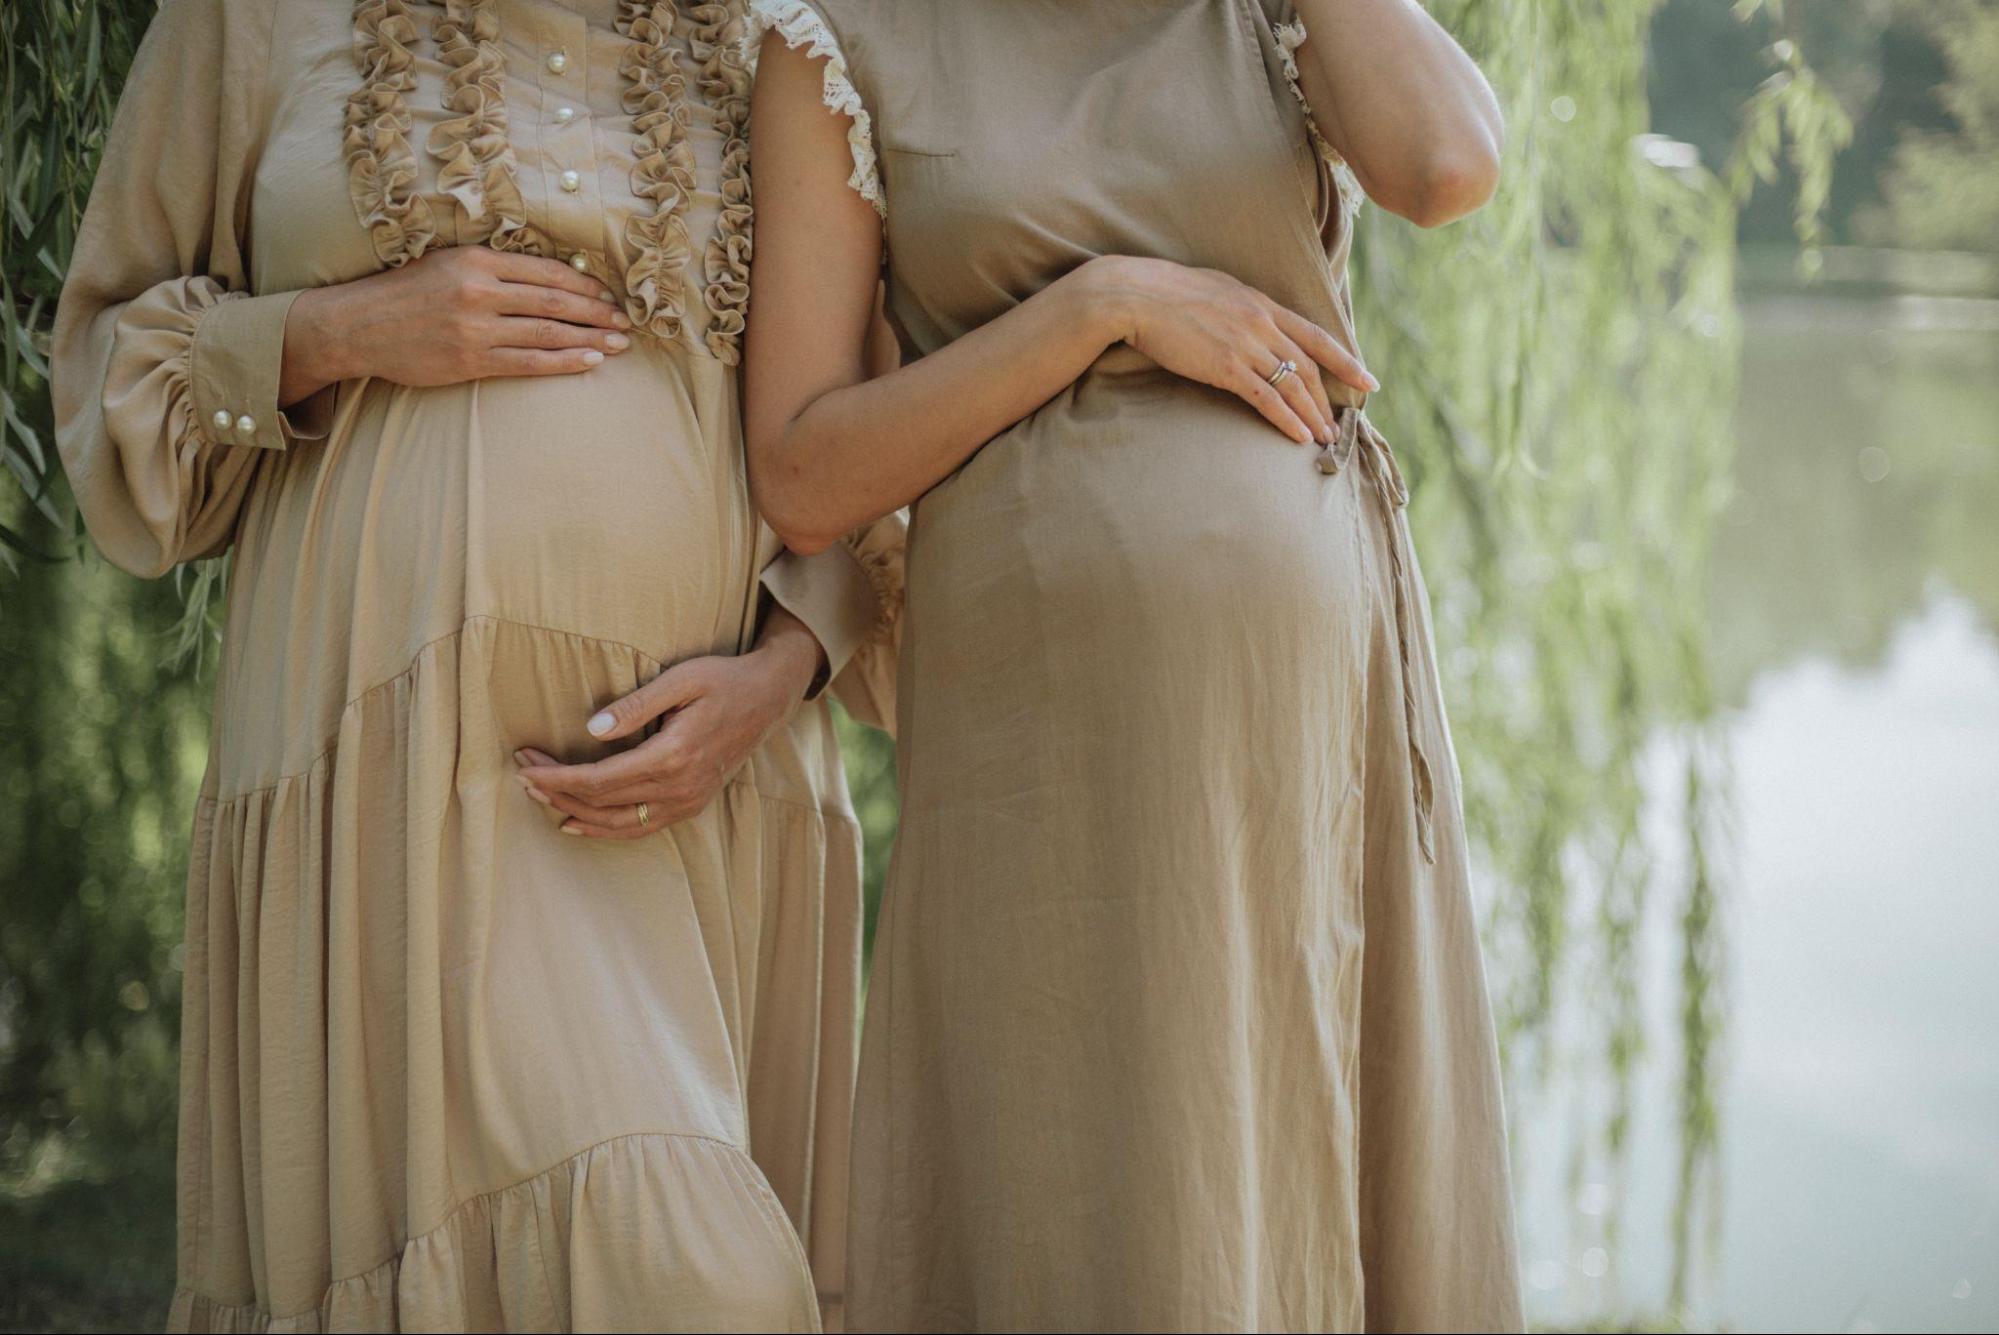 Dresses or gowns make perfect maternity outfits